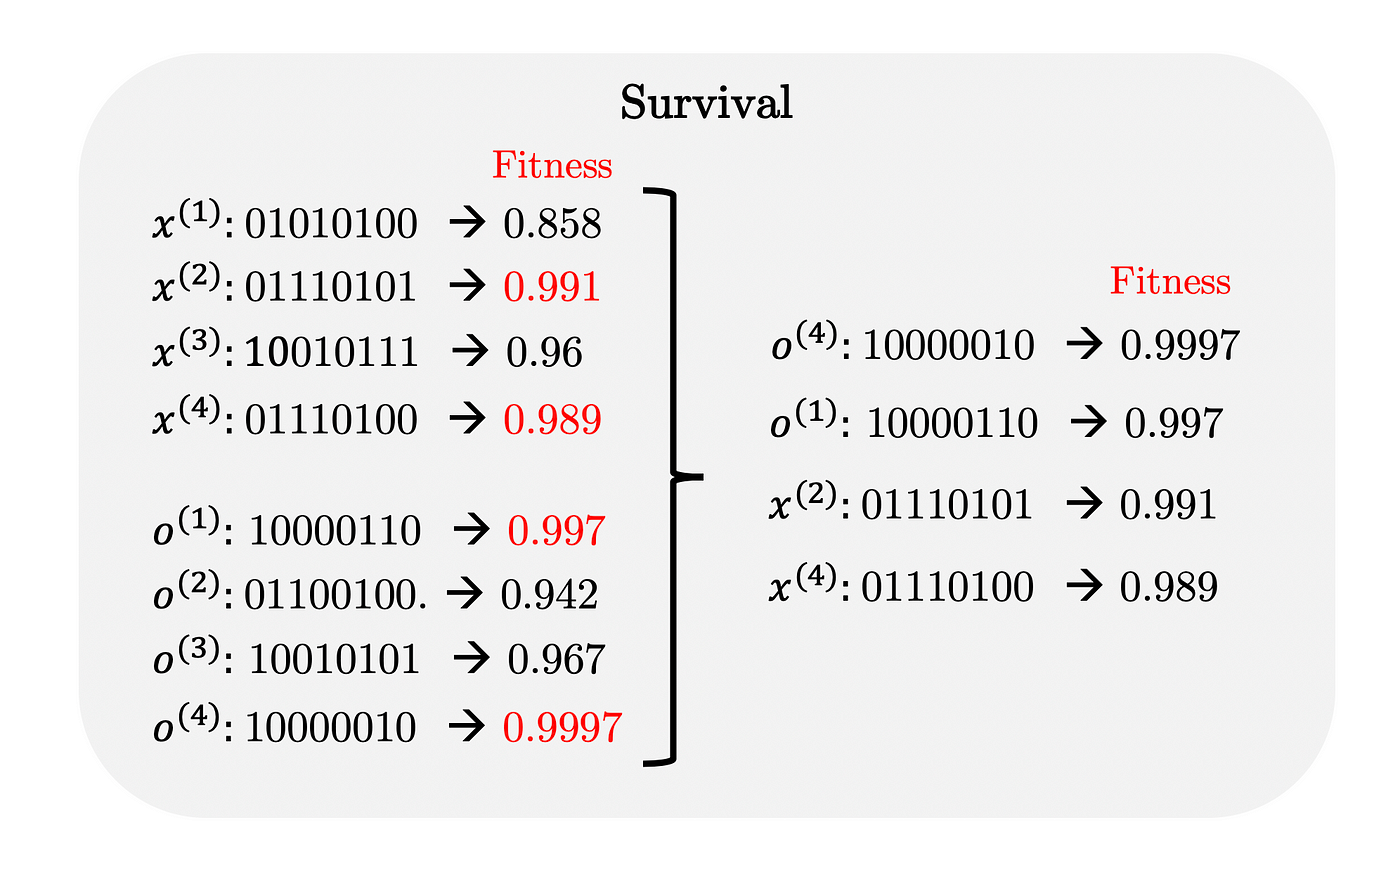 Evolutionary Programming: The Survival of the Fittest Data Models